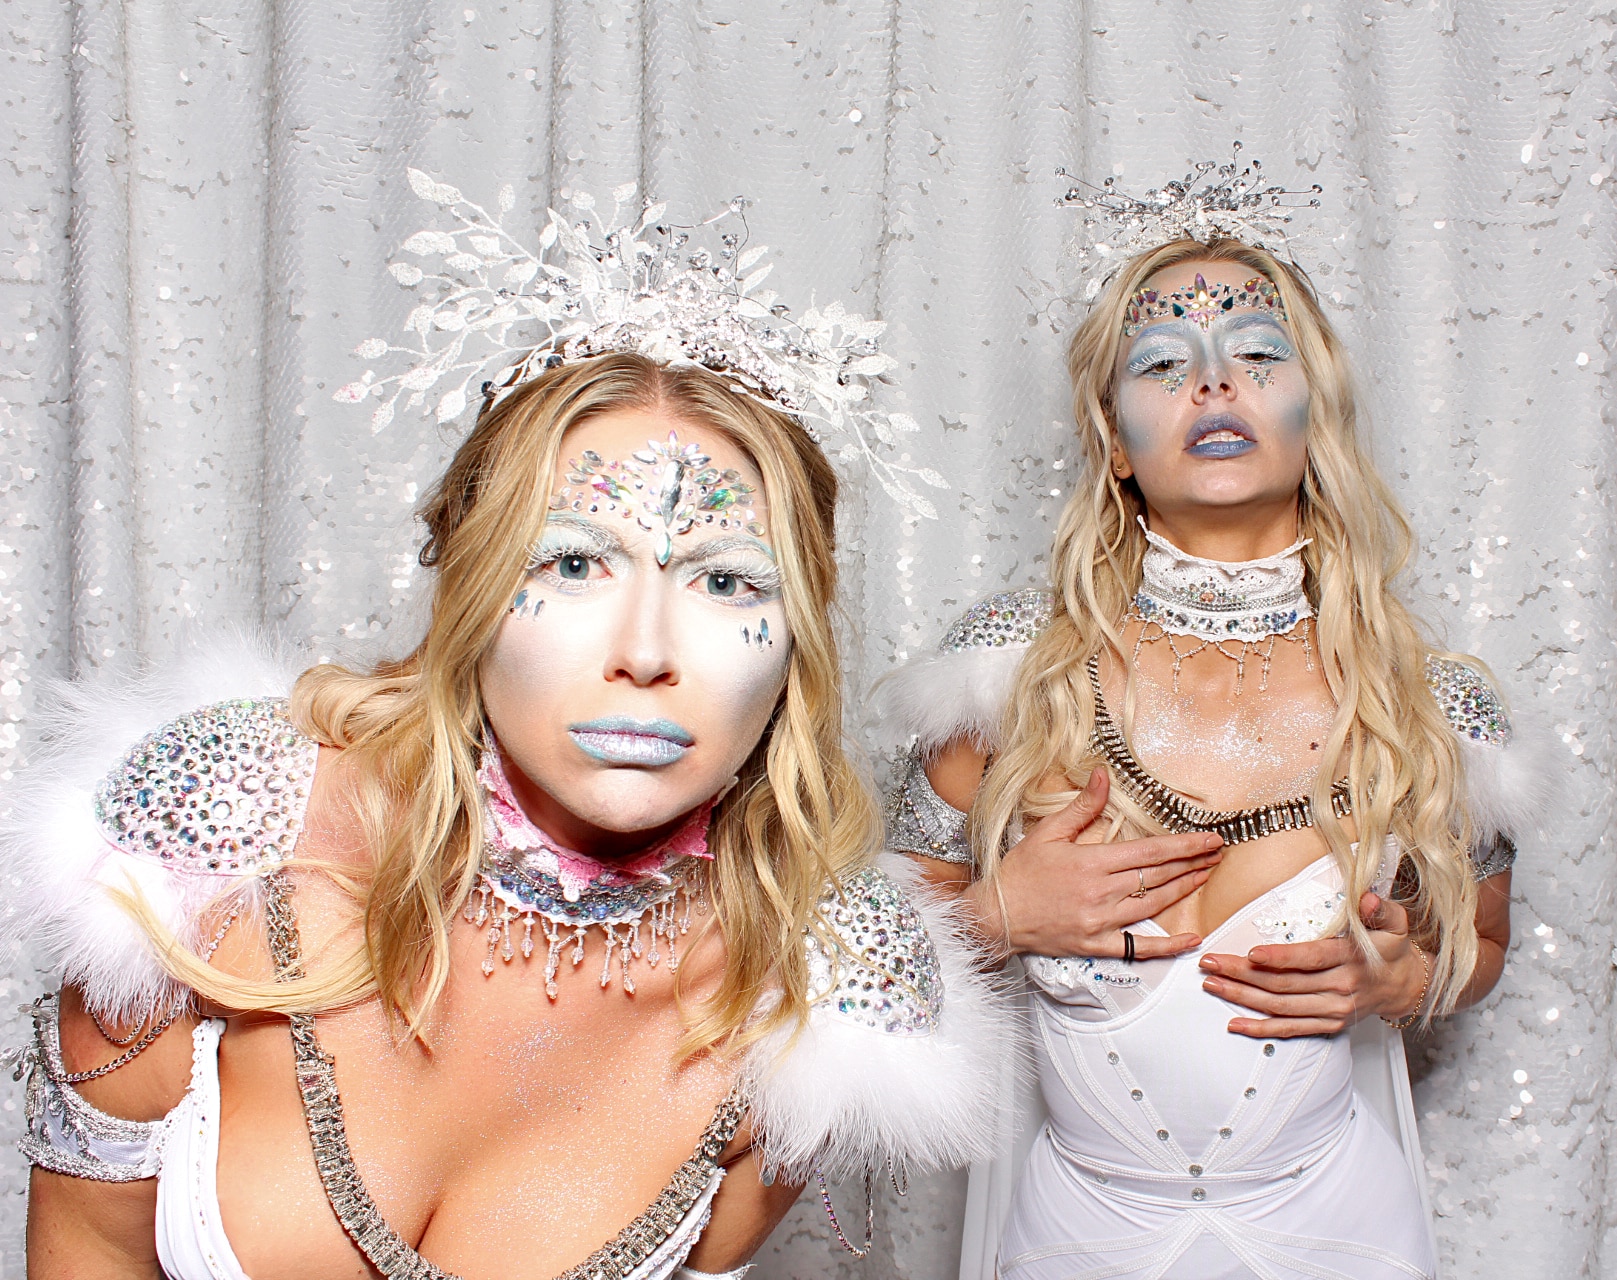 Stassi Schroeder and Ariana Madix dressed up in ice princess costumes and makeup on VPR